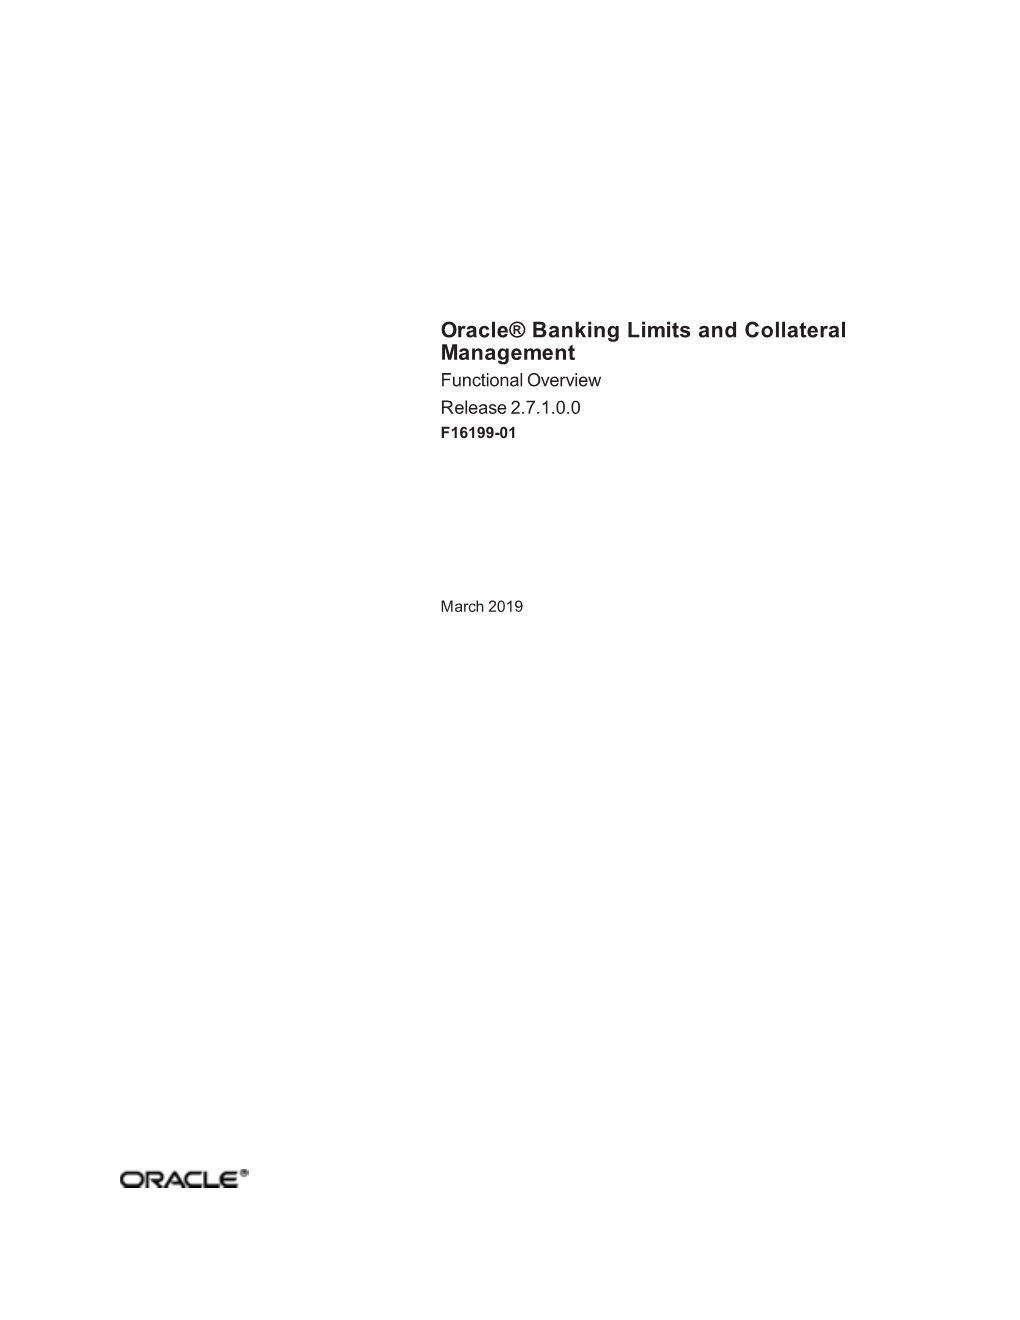 Oracle Banking Limits and Collateral Management Functional Overview, Release 2.7.1.0.0 F16199-01 Copyright © 2011, 2019, Oracle And/Or Its Affiliates